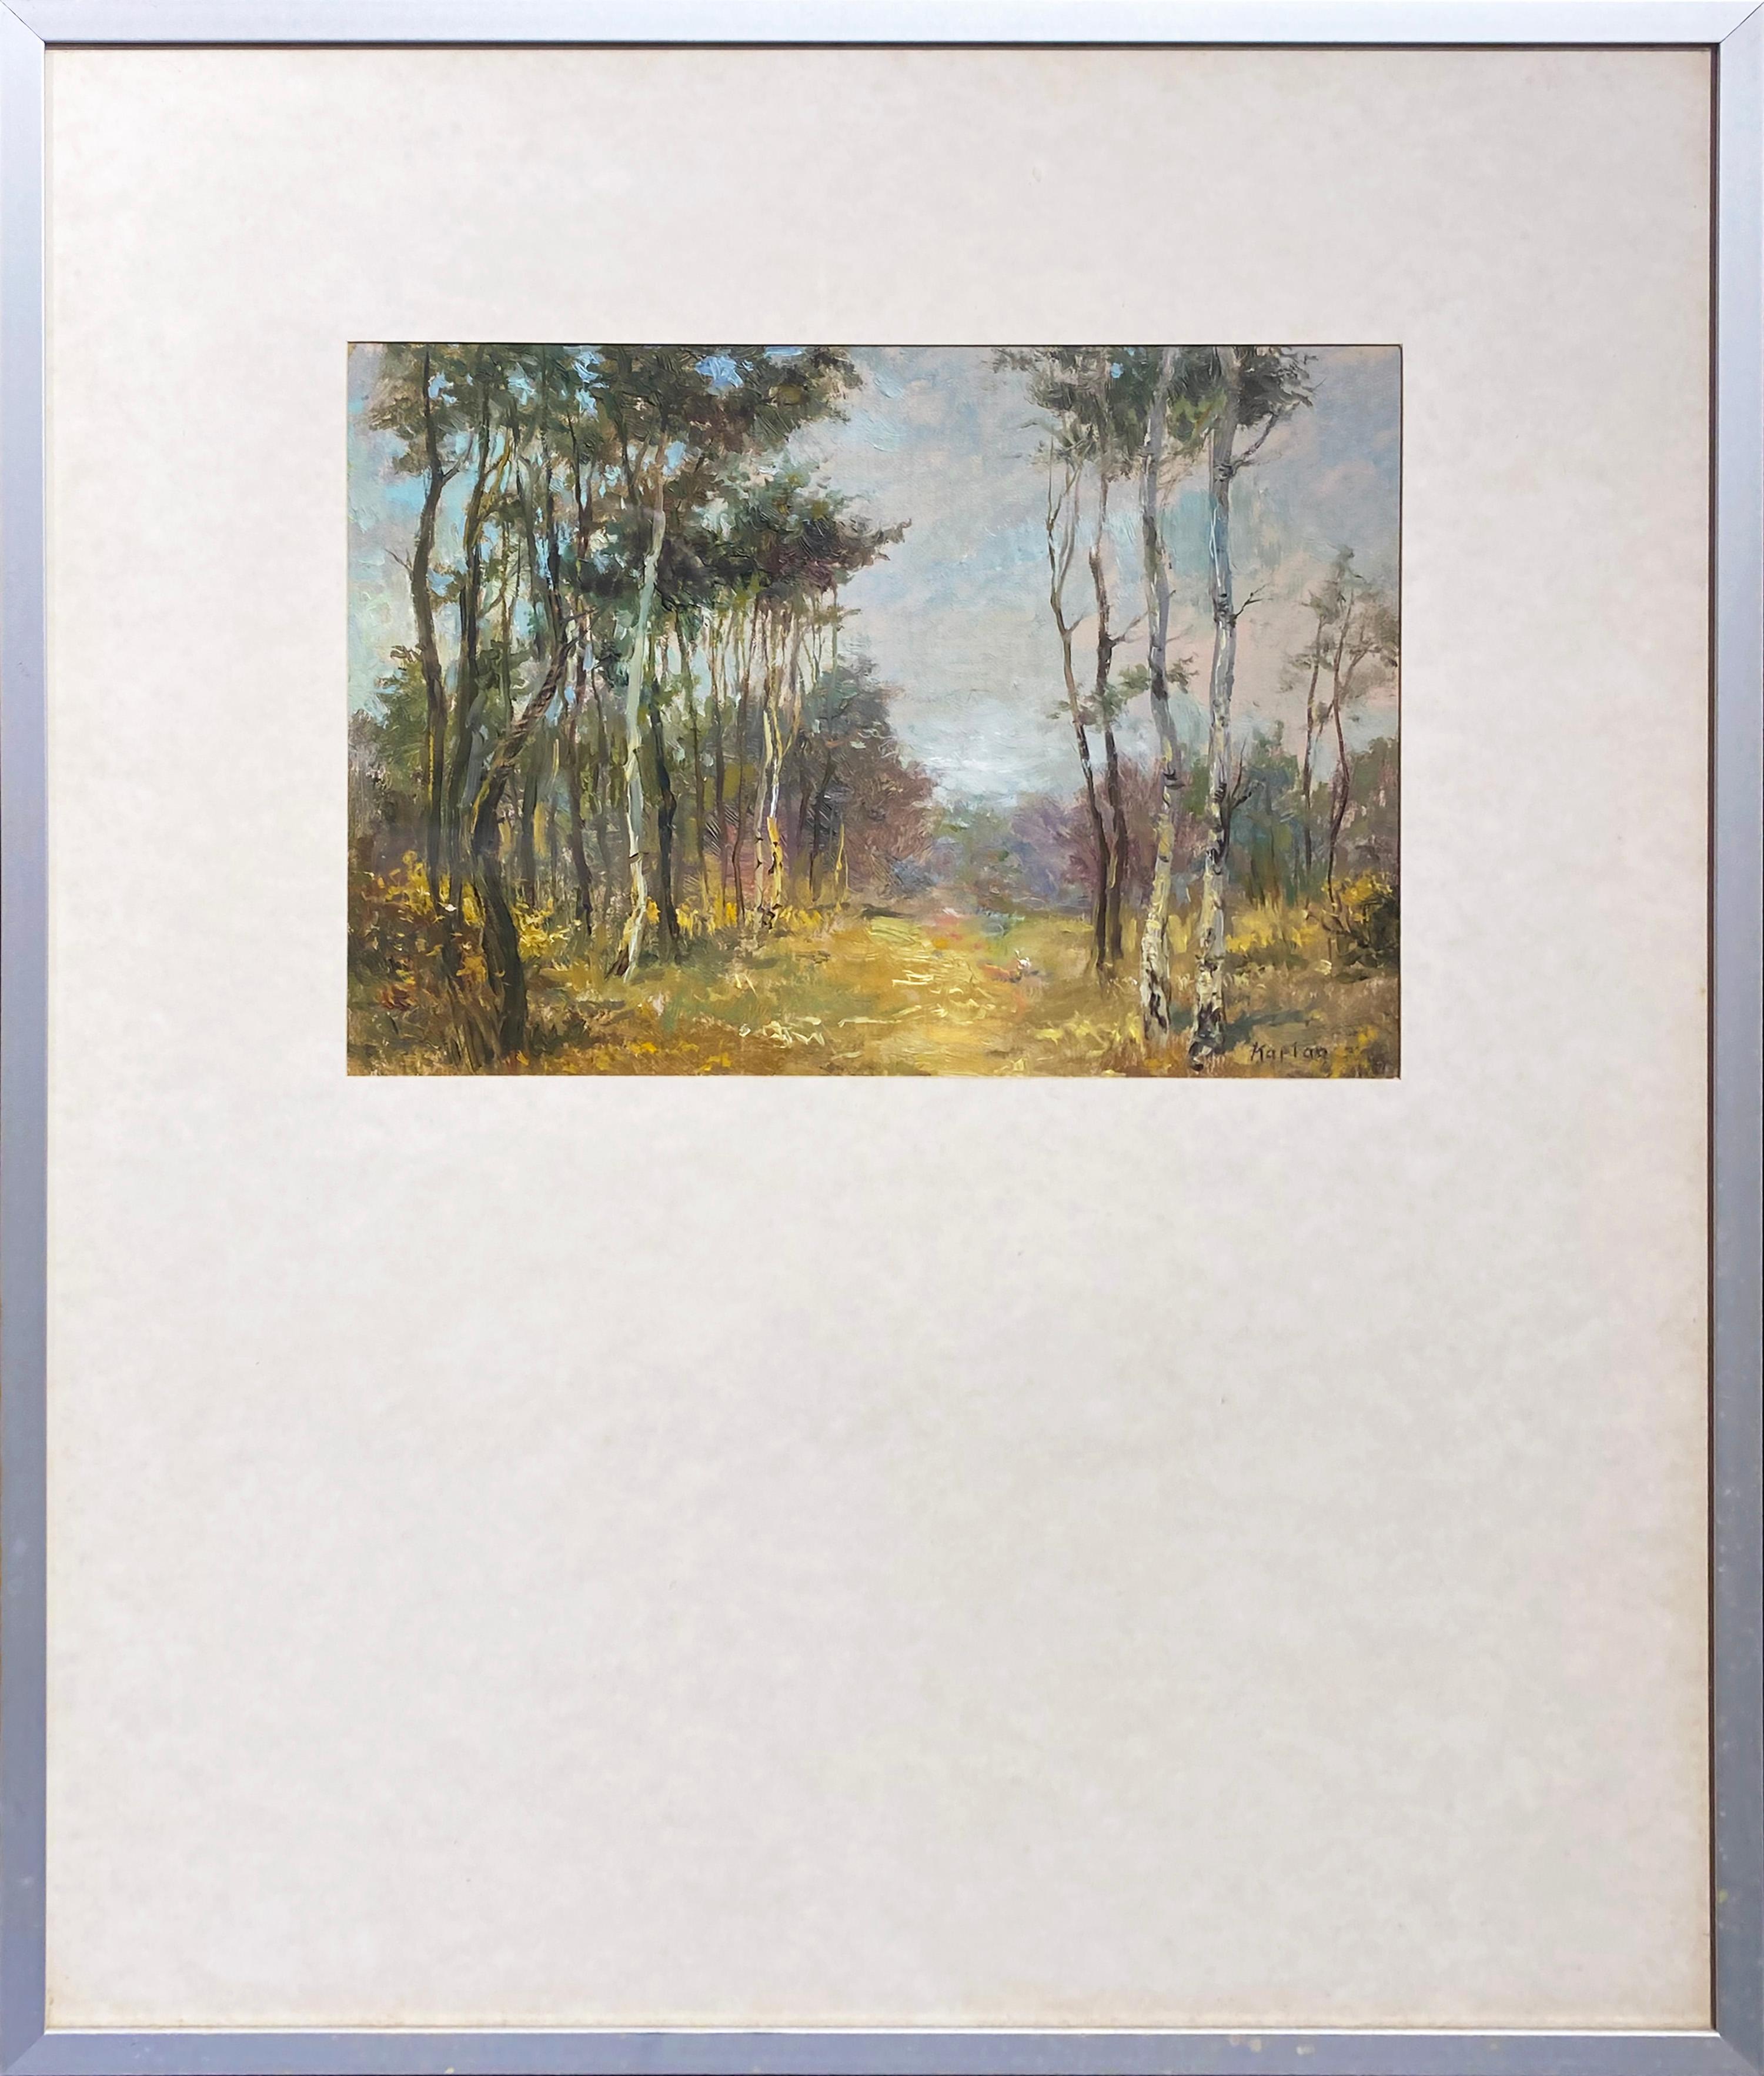 Lonesome Woods - Painting by Kaplan, Mark